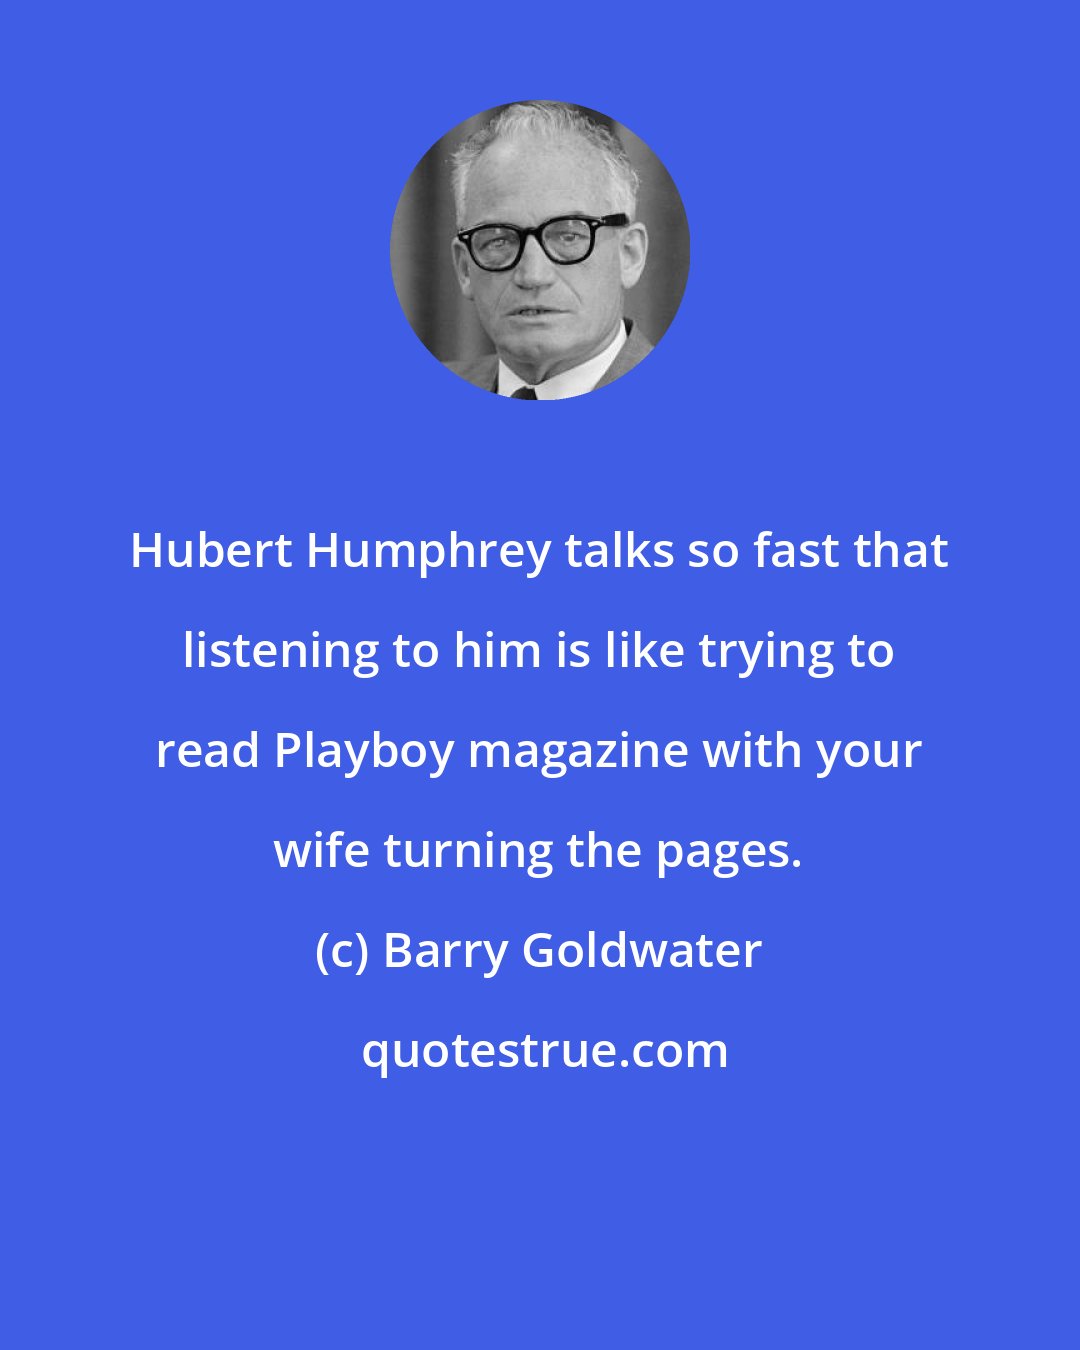 Barry Goldwater: Hubert Humphrey talks so fast that listening to him is like trying to read Playboy magazine with your wife turning the pages.